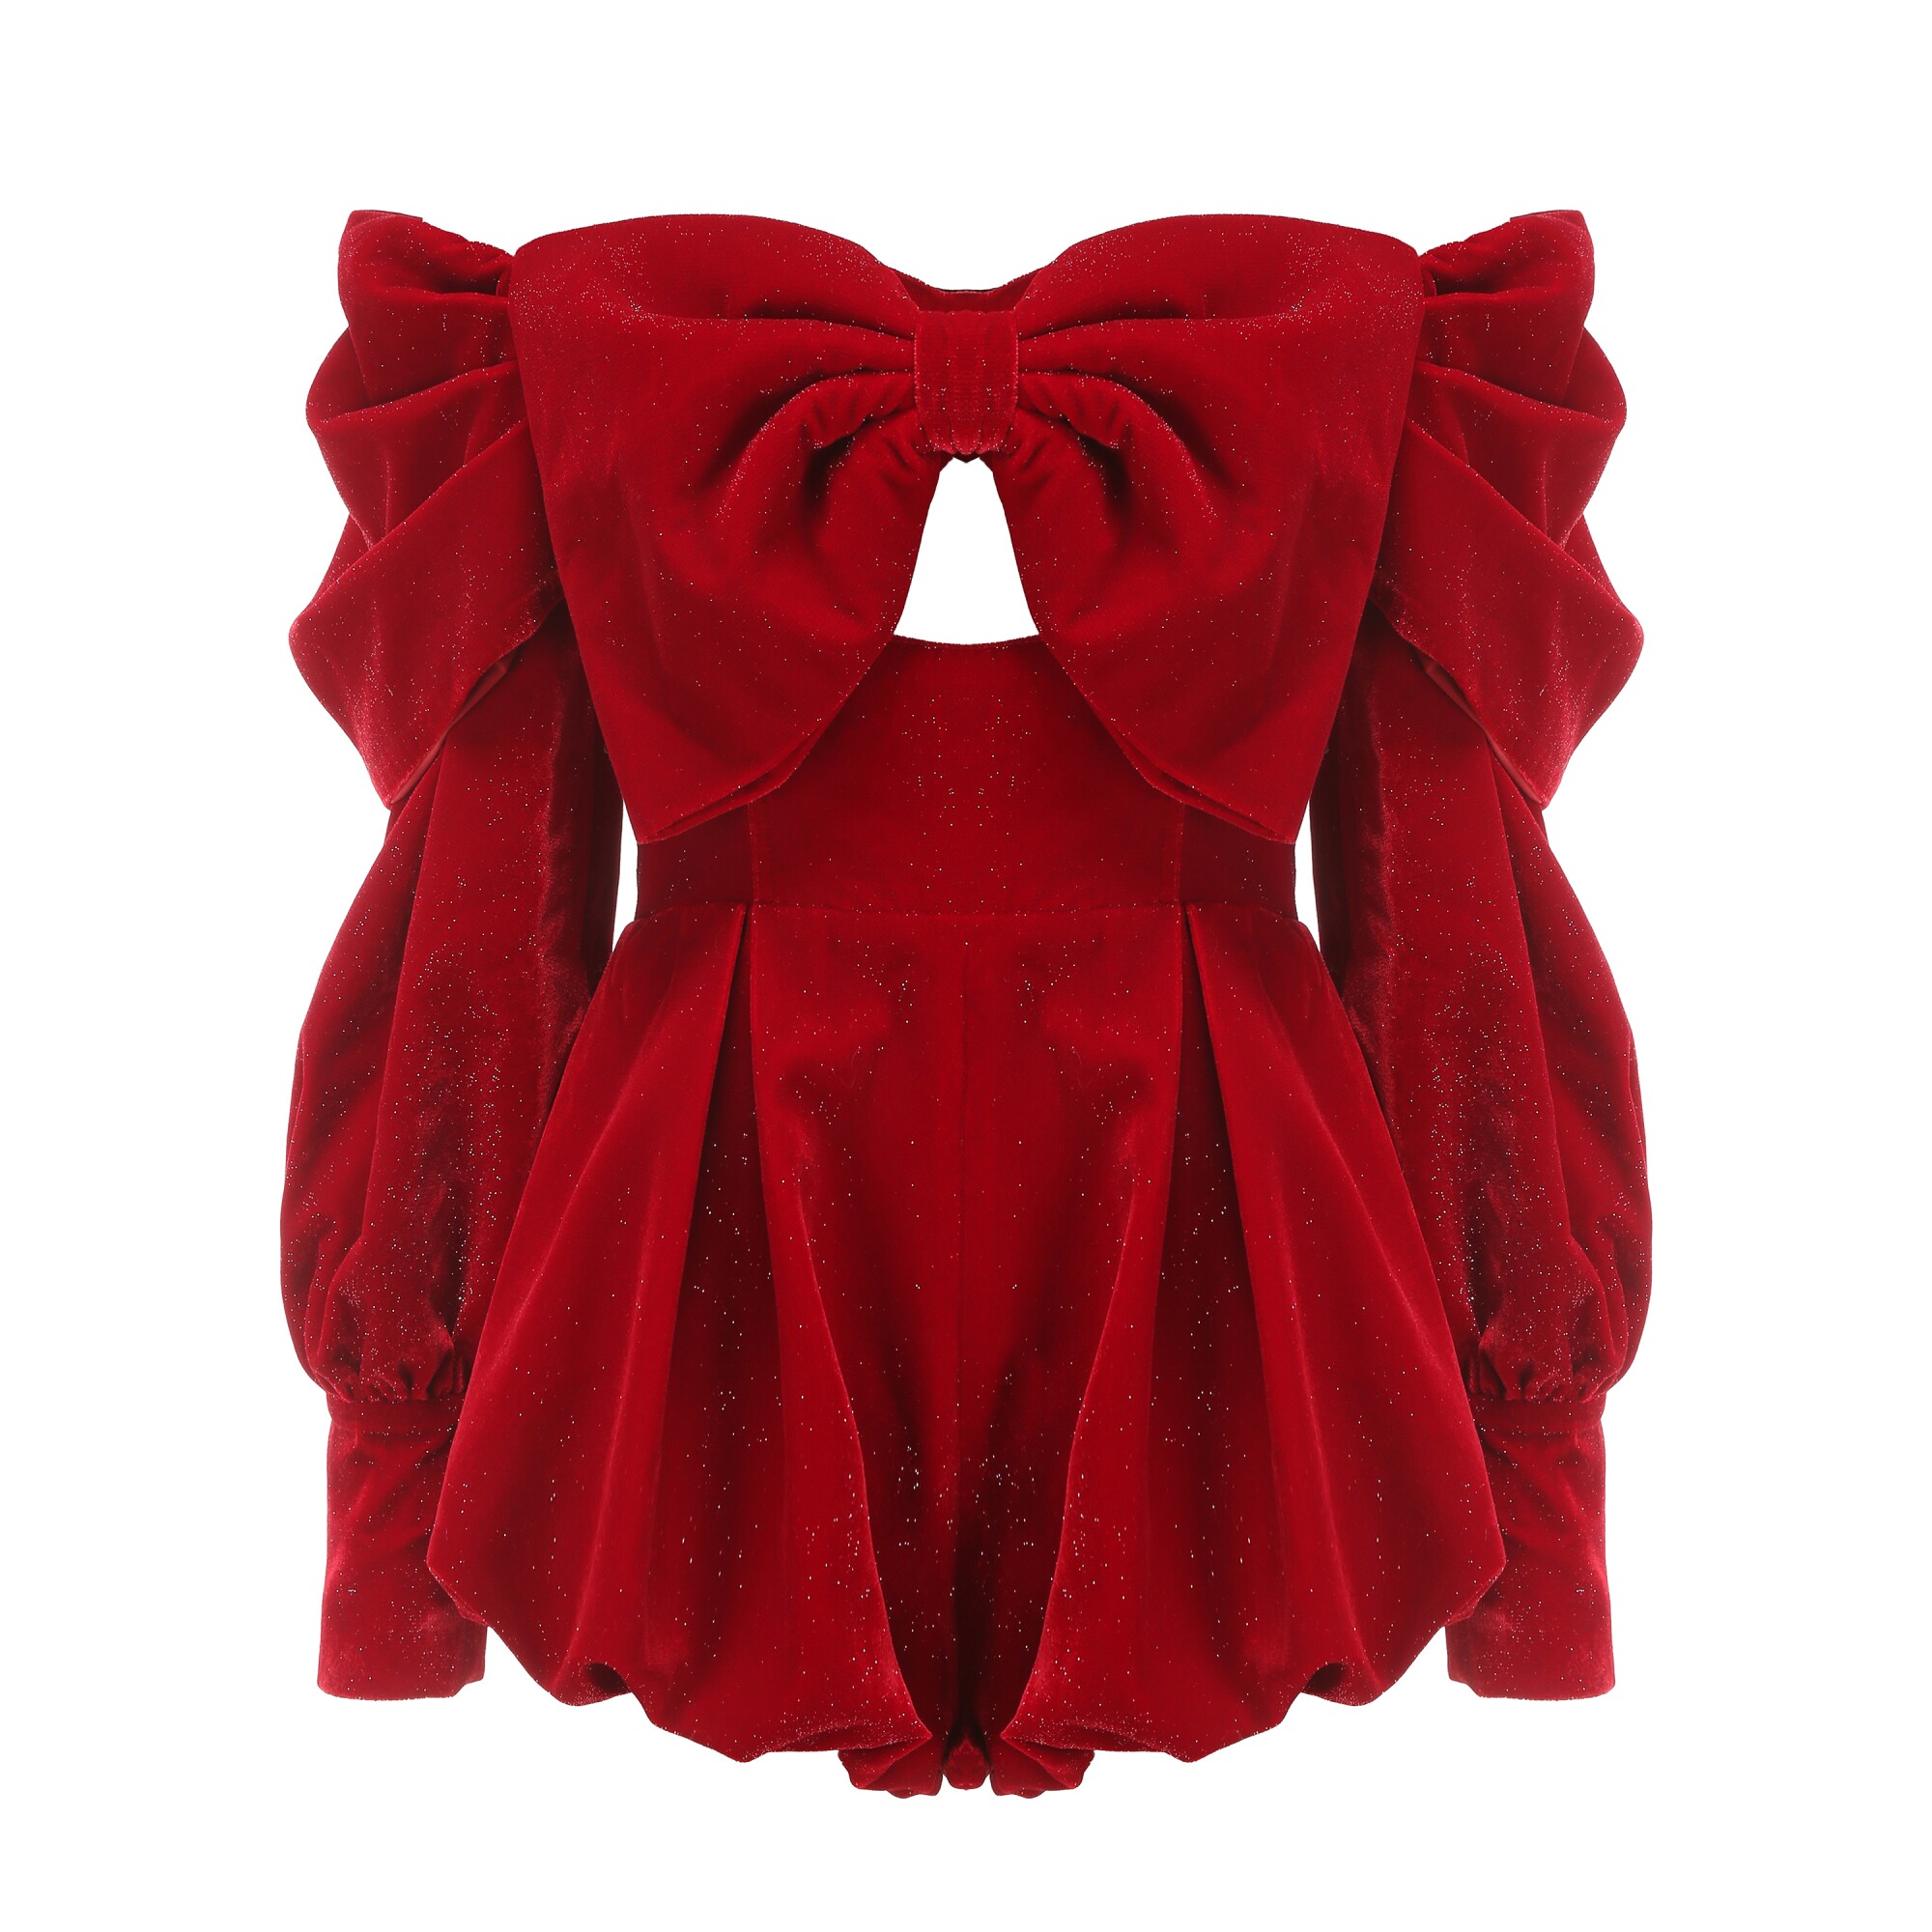 A flouncy red long-sleeved, short-legged jumpsuit with bow neckline.